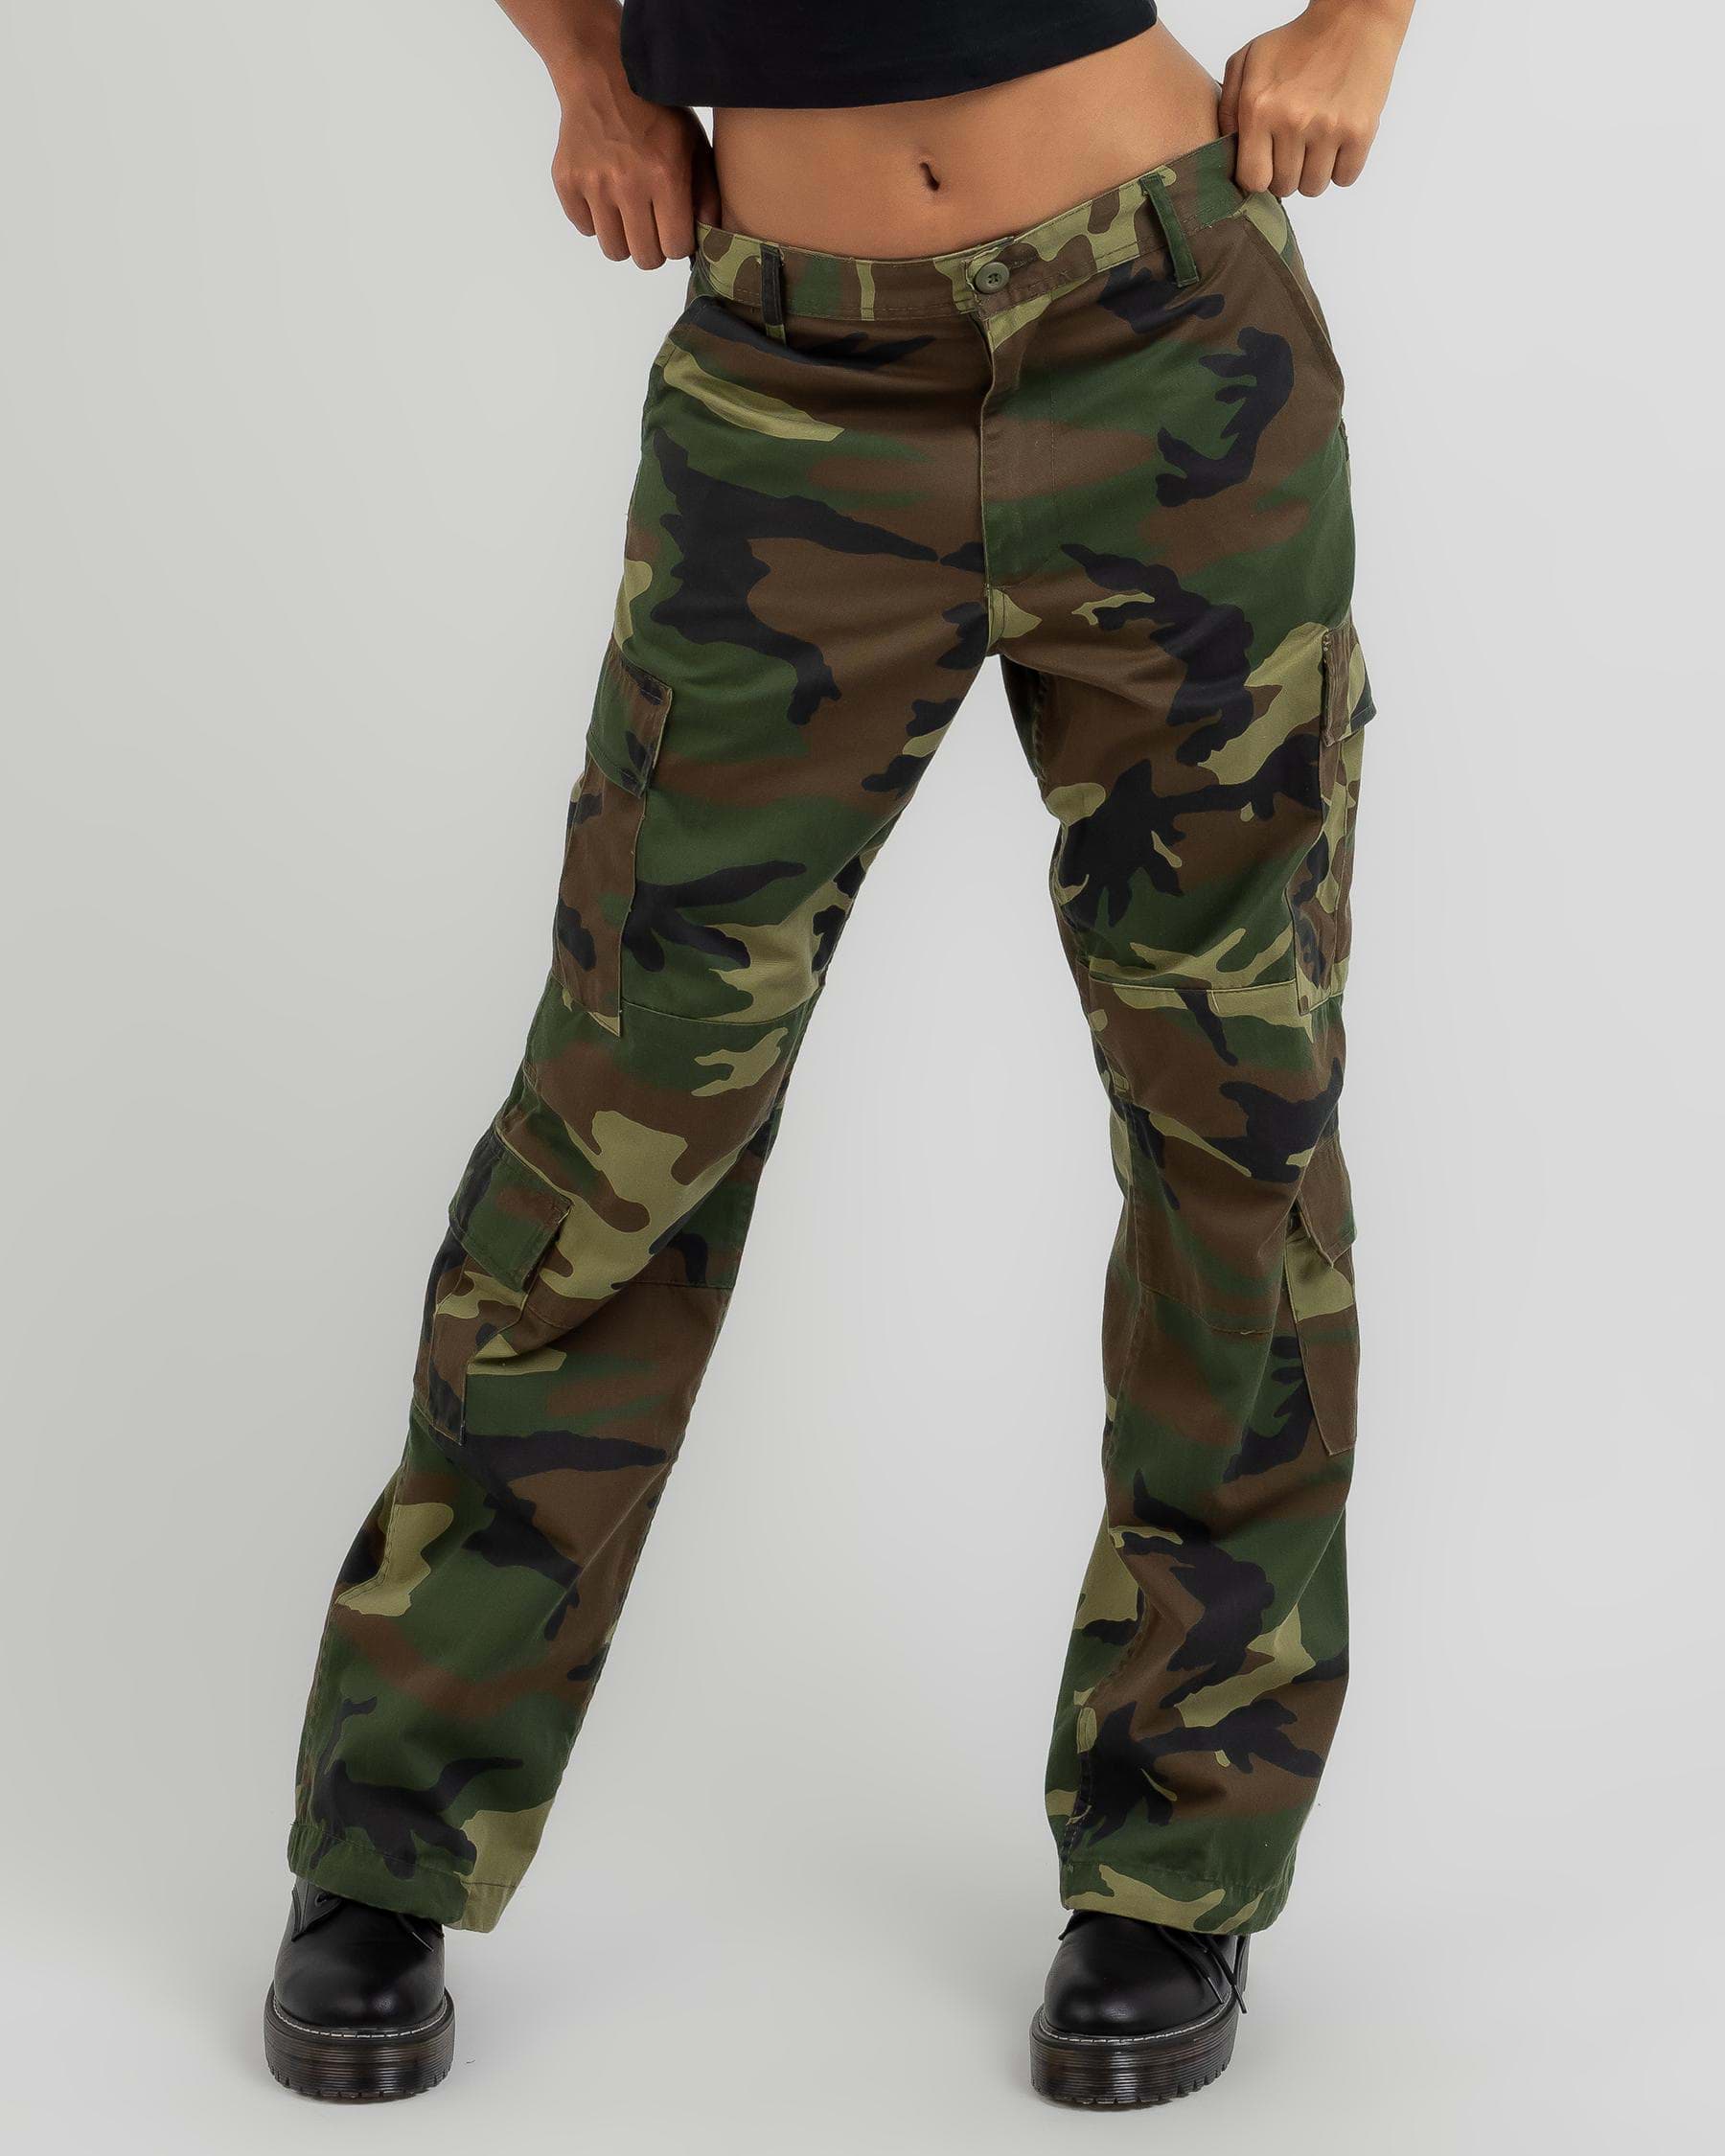 Rothco Vintage Paratrooper Fatigue Pants In Woodland Camo - Fast ...